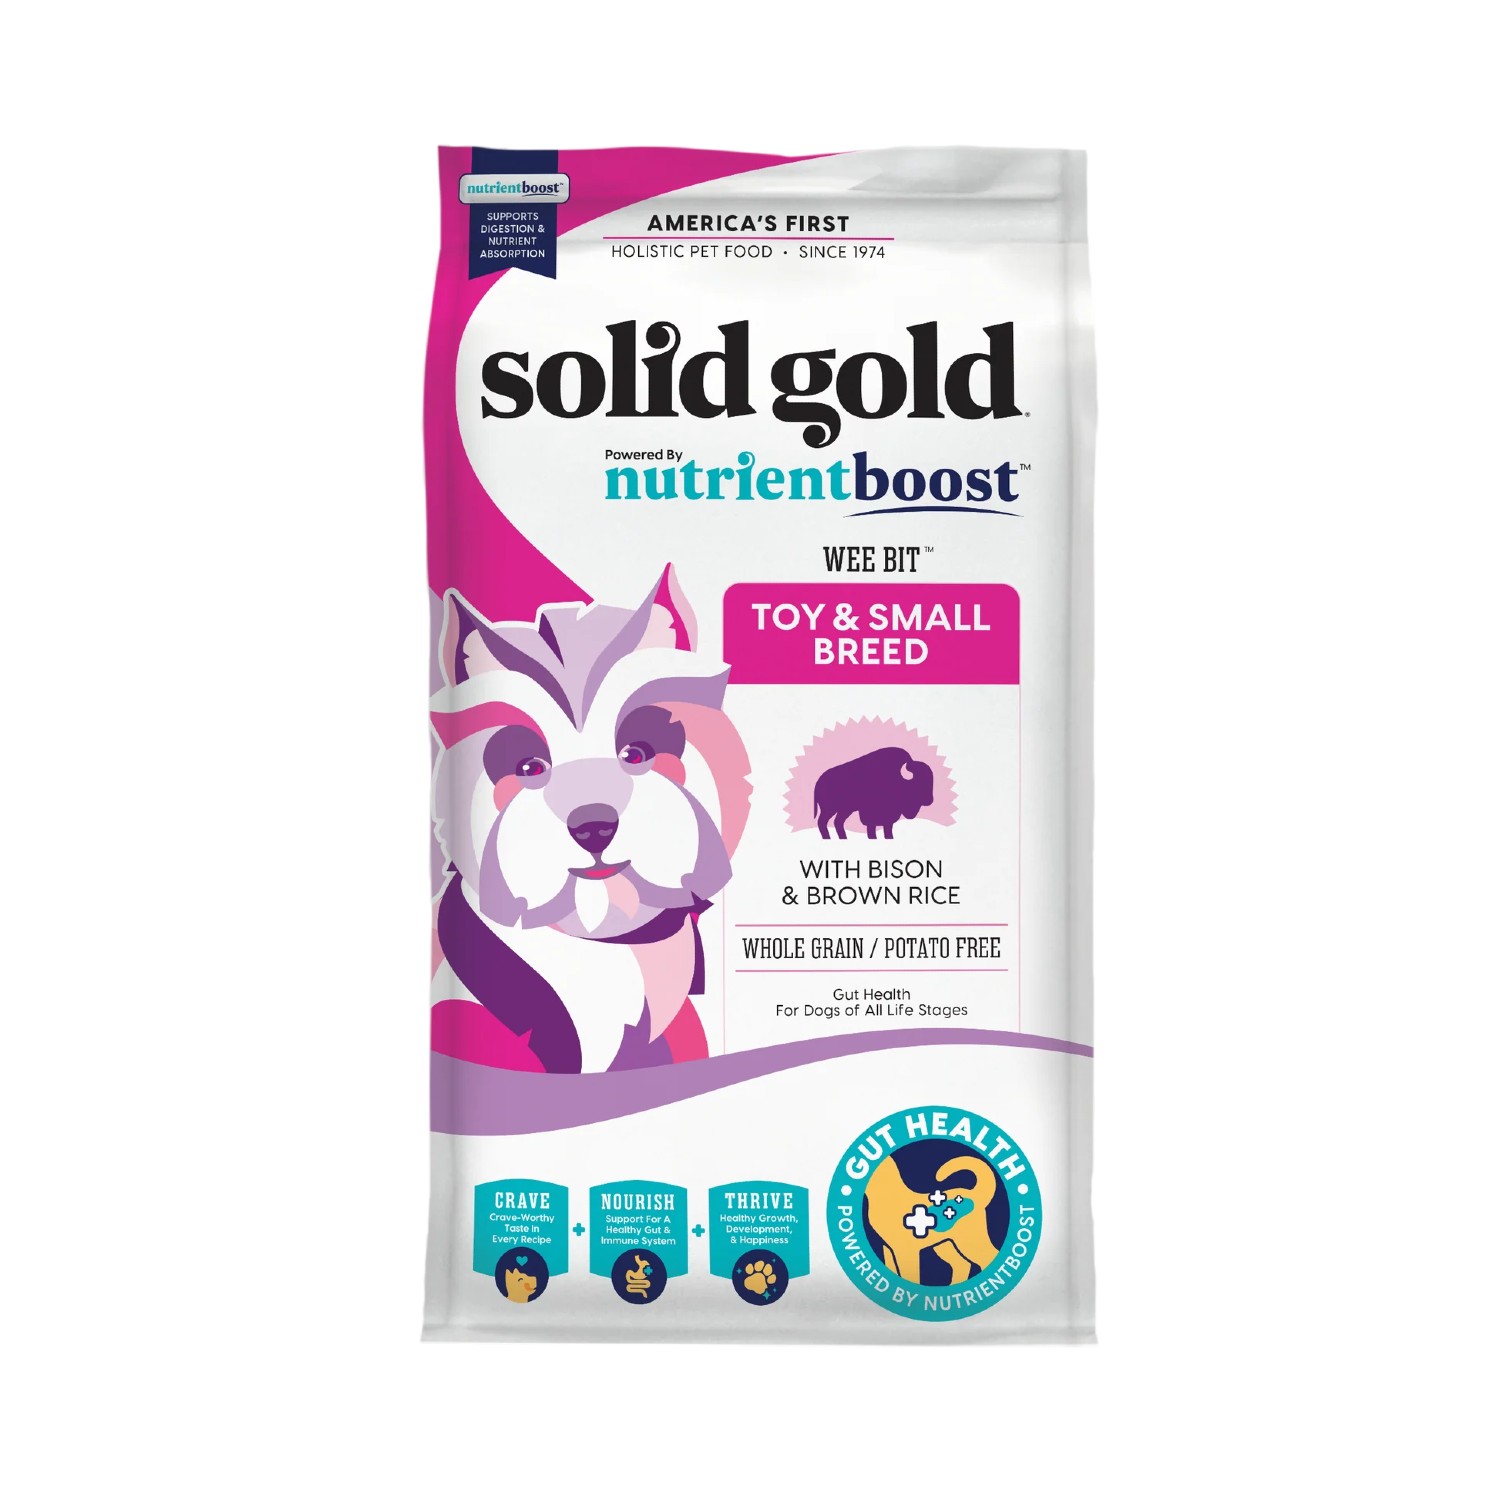 Solid Gold Nutrientboost Wee Bit Toy & Small Breed Dry Dog Food - Bison, Brown Rice & Pearled Barley Recipe